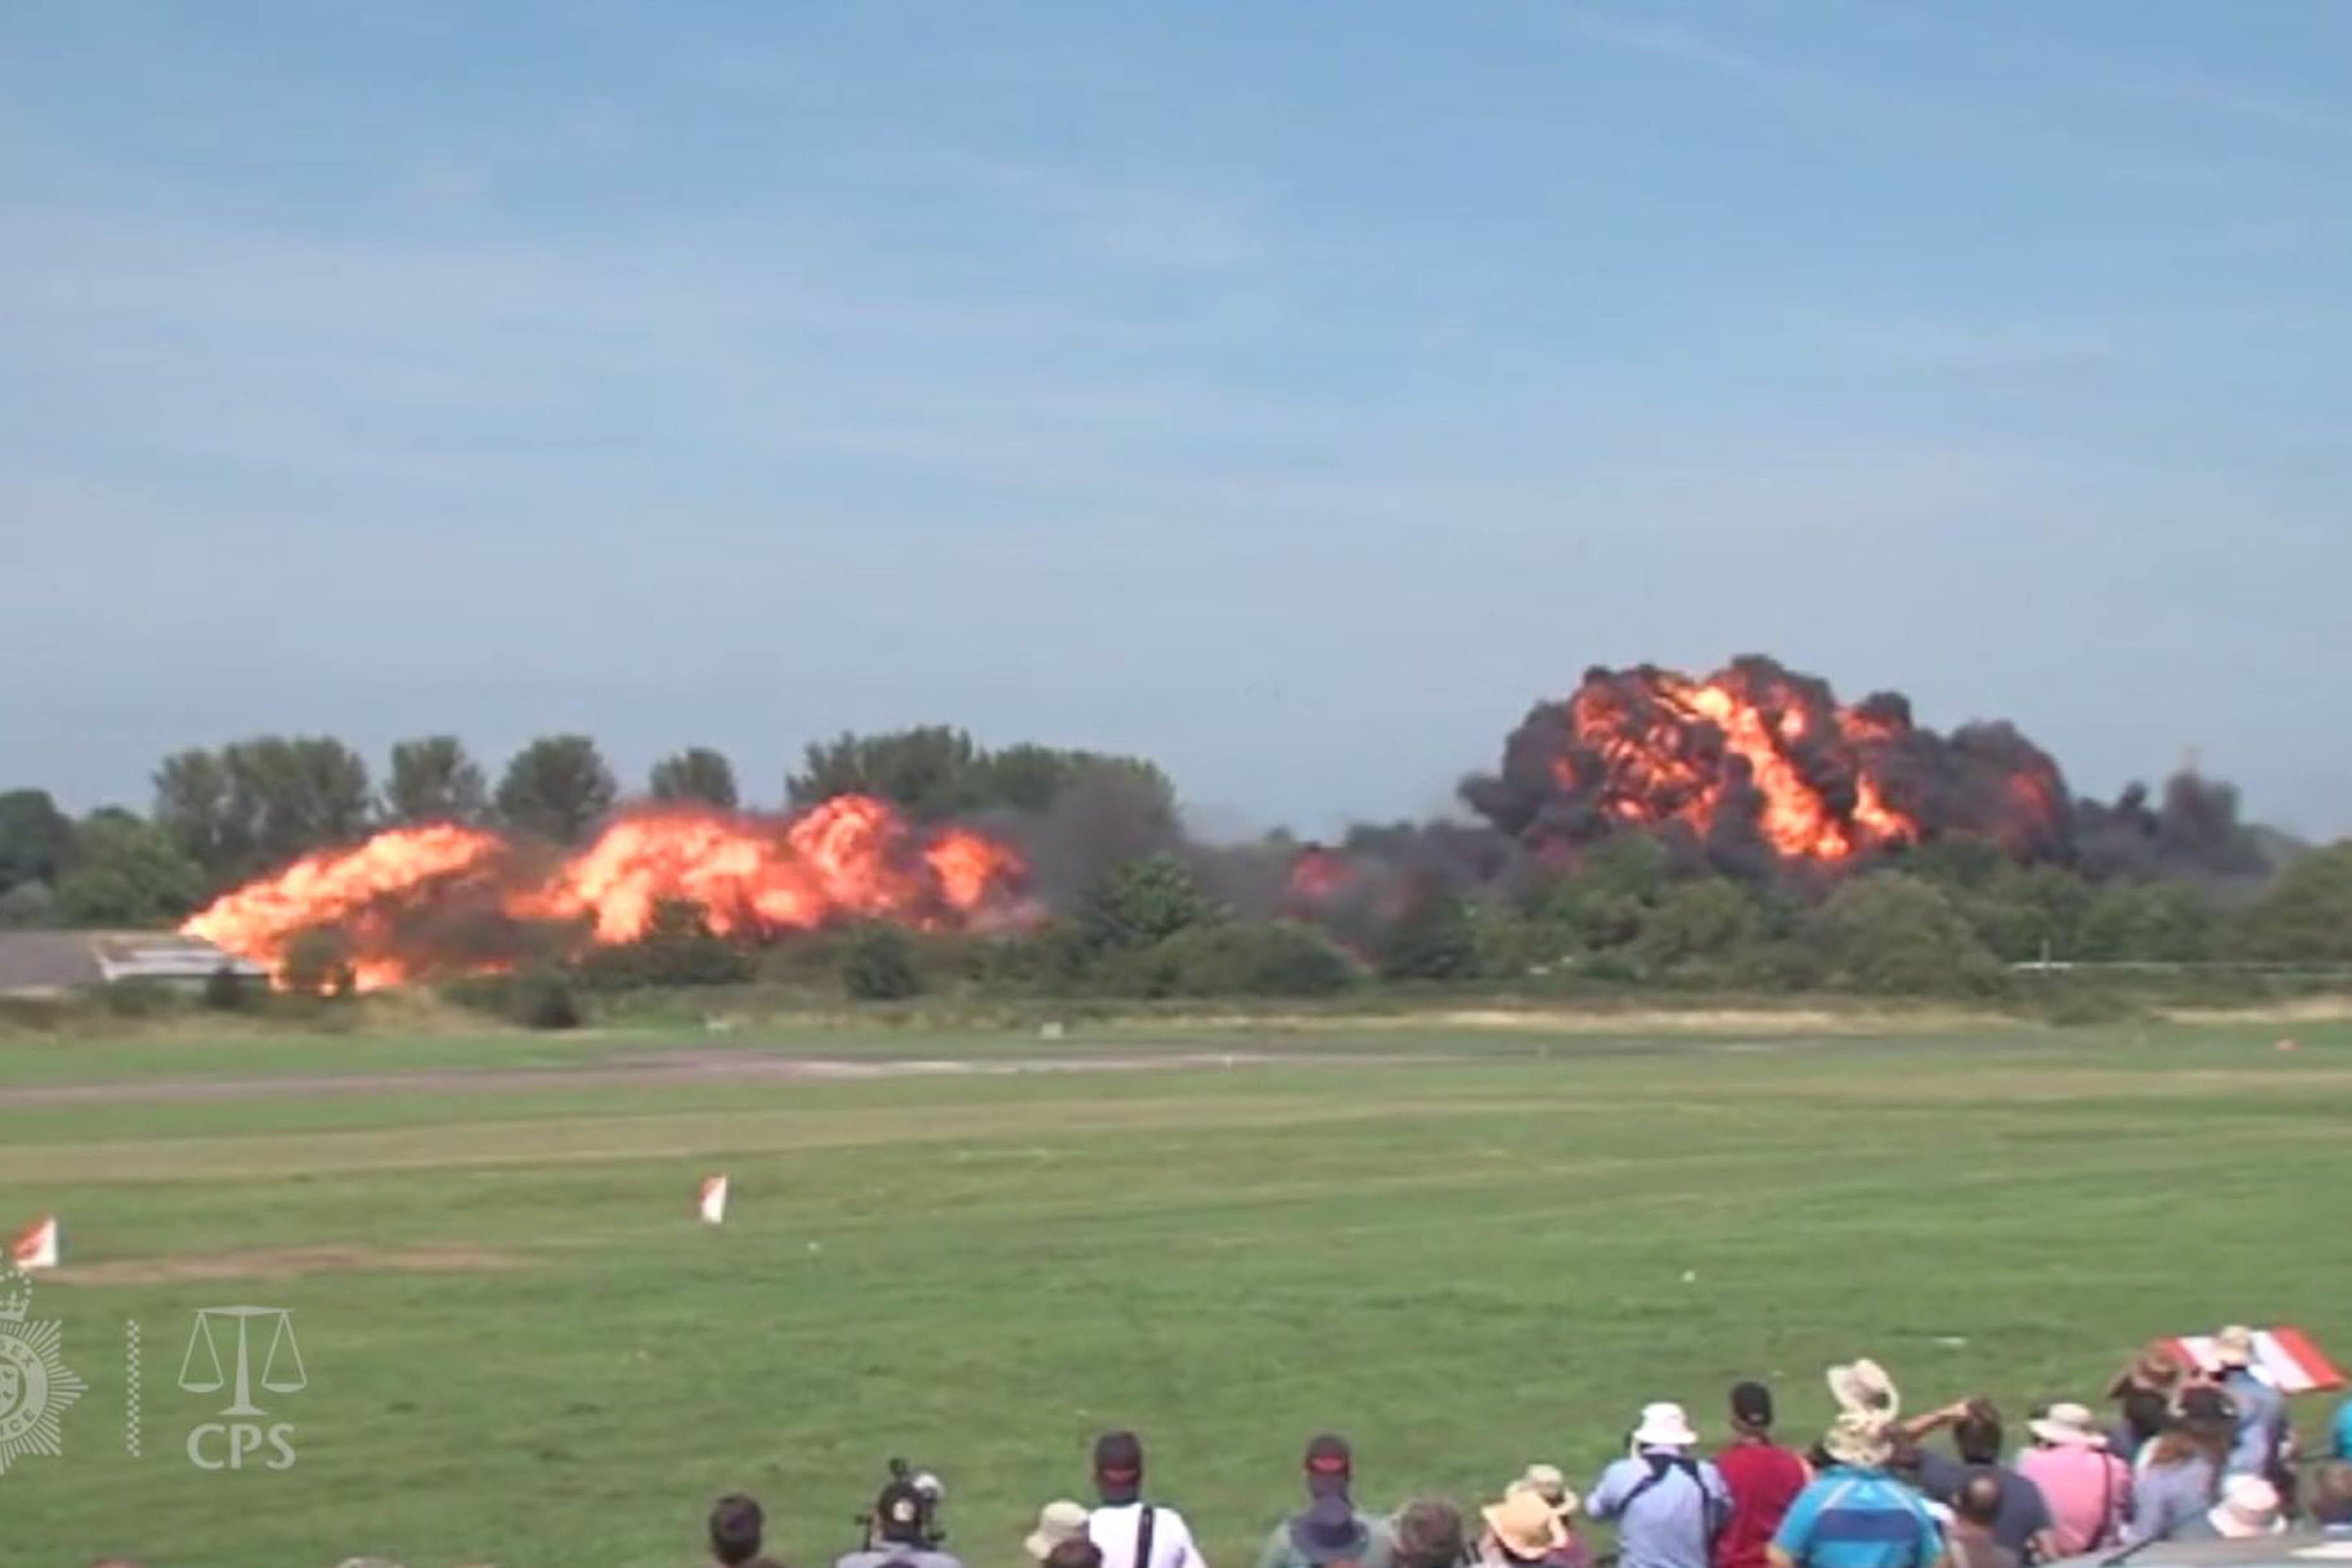 The crash during the Shoreham Airshow on August 22 2015